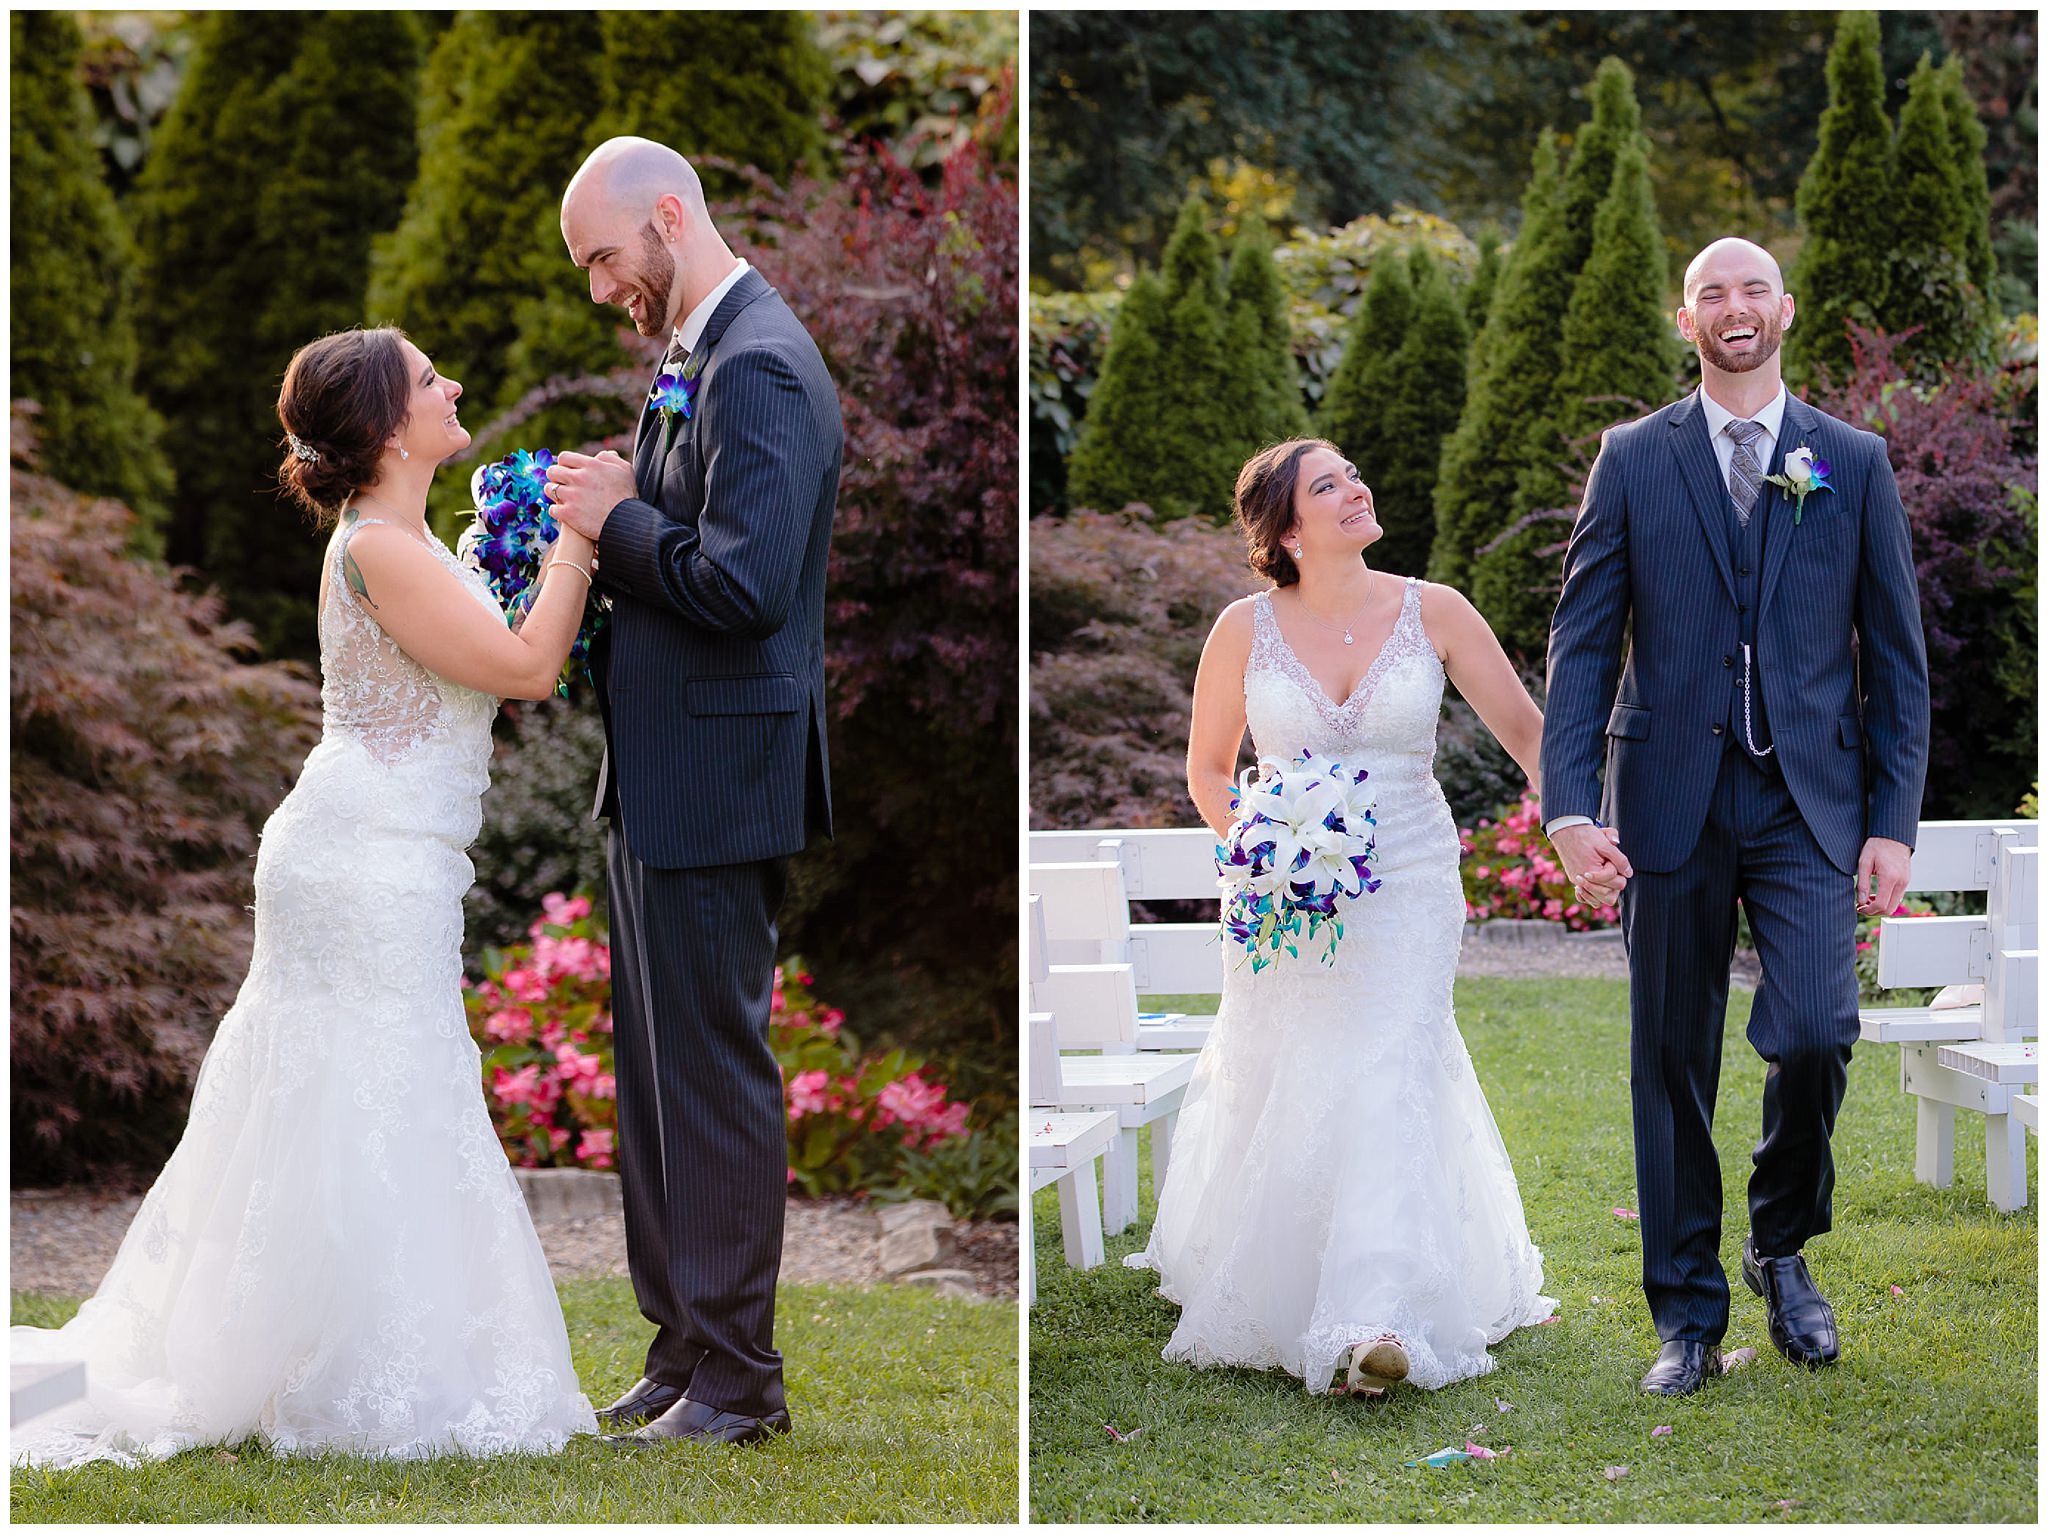 Newlyweds laugh as they exit their National Aviary wedding ceremony